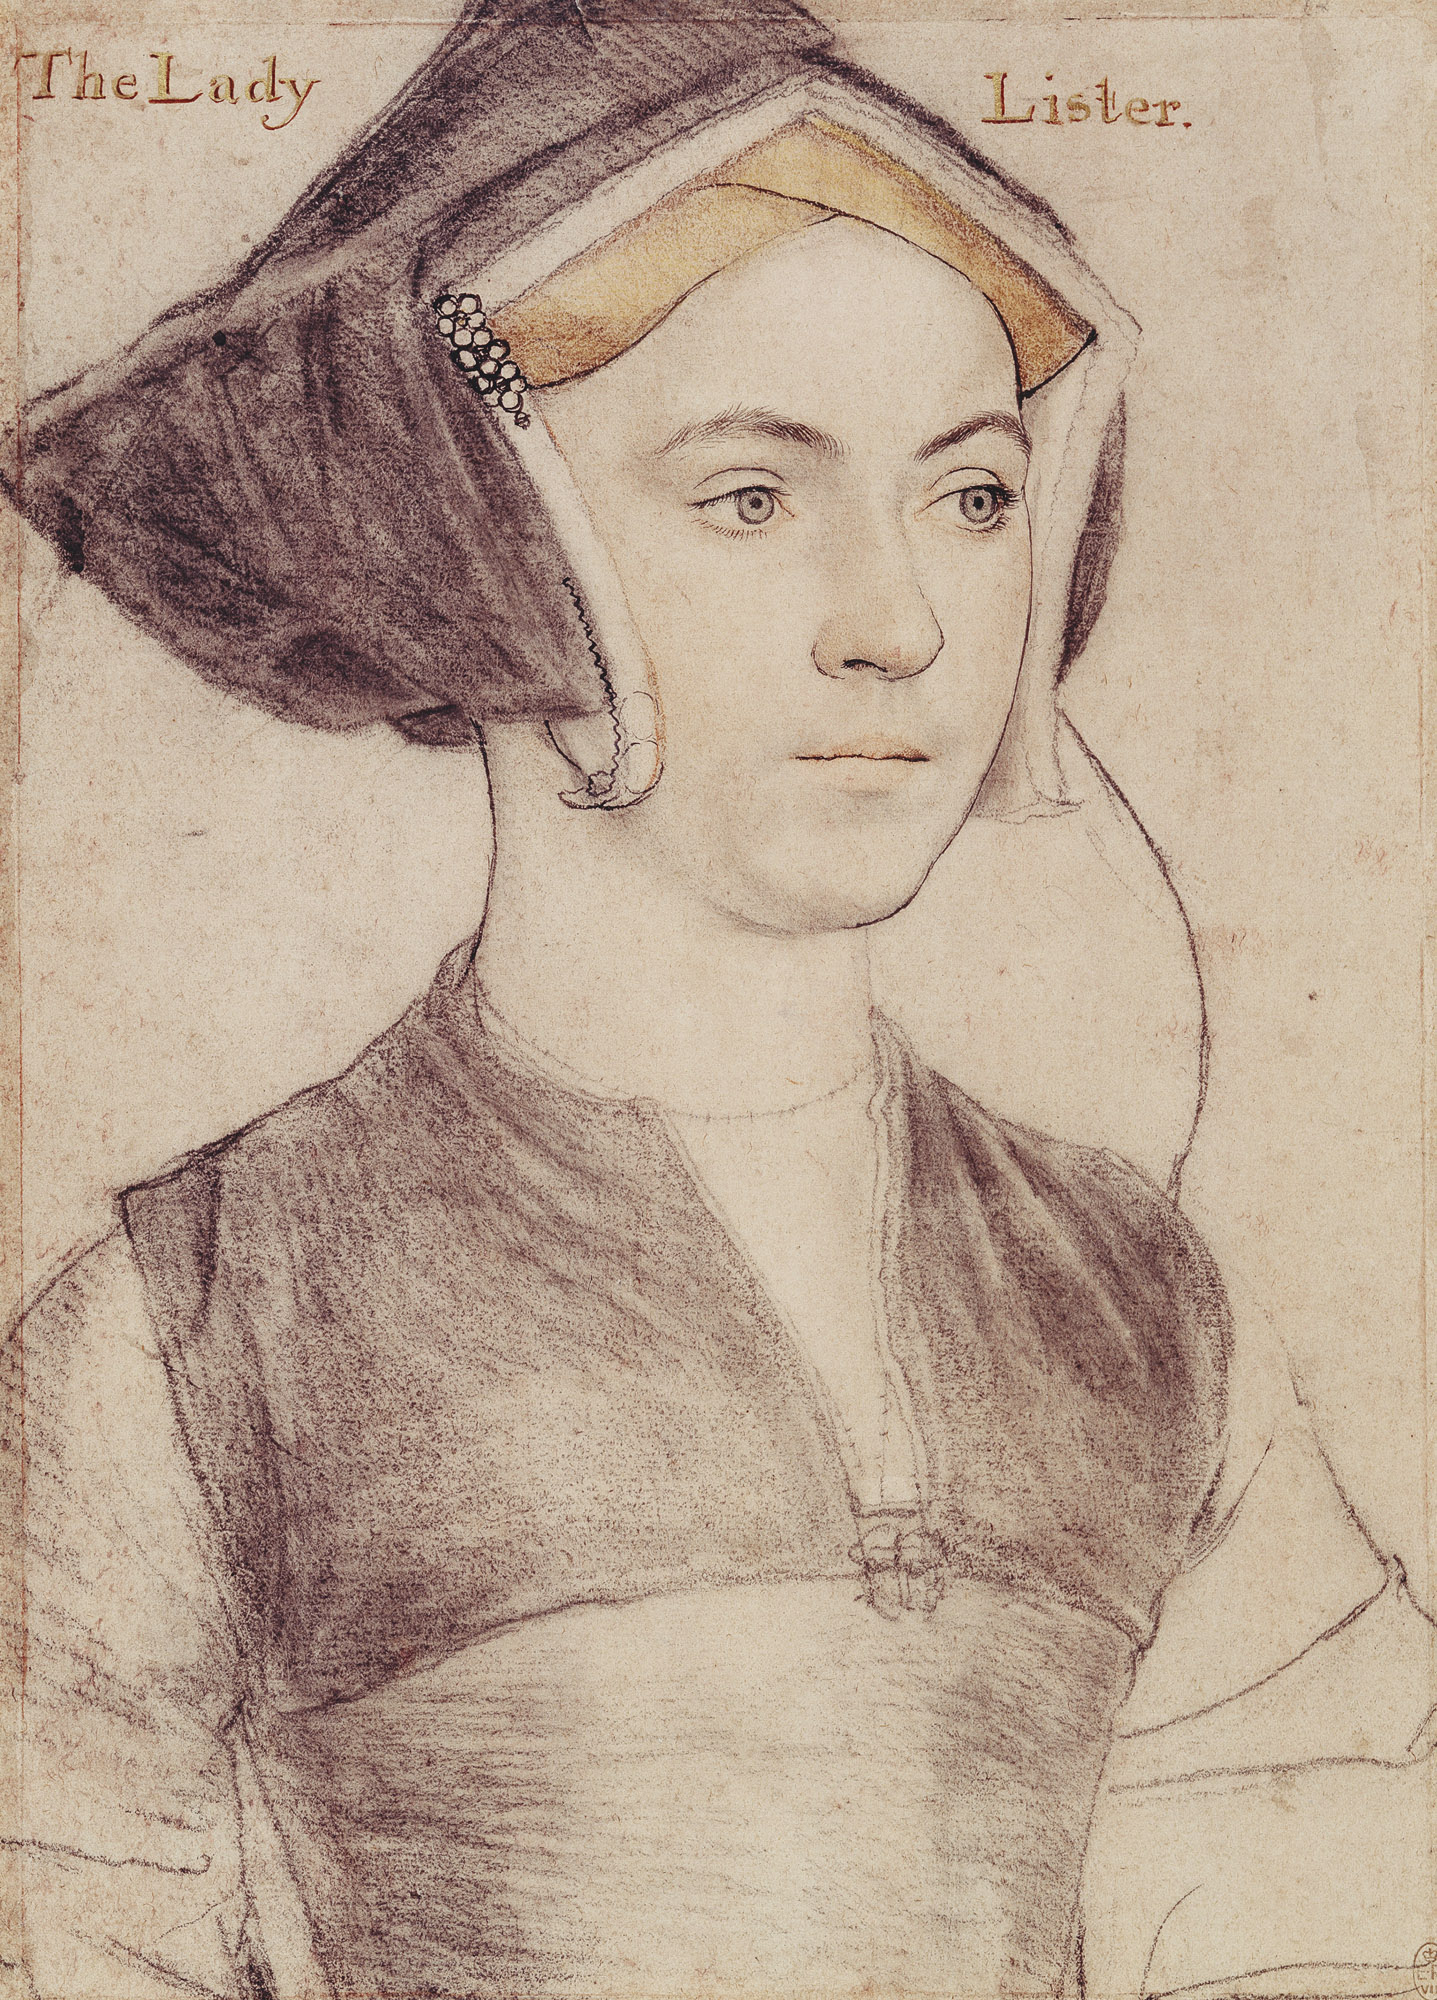 Hans Holbein the Younger - Lady Lister RL 12219